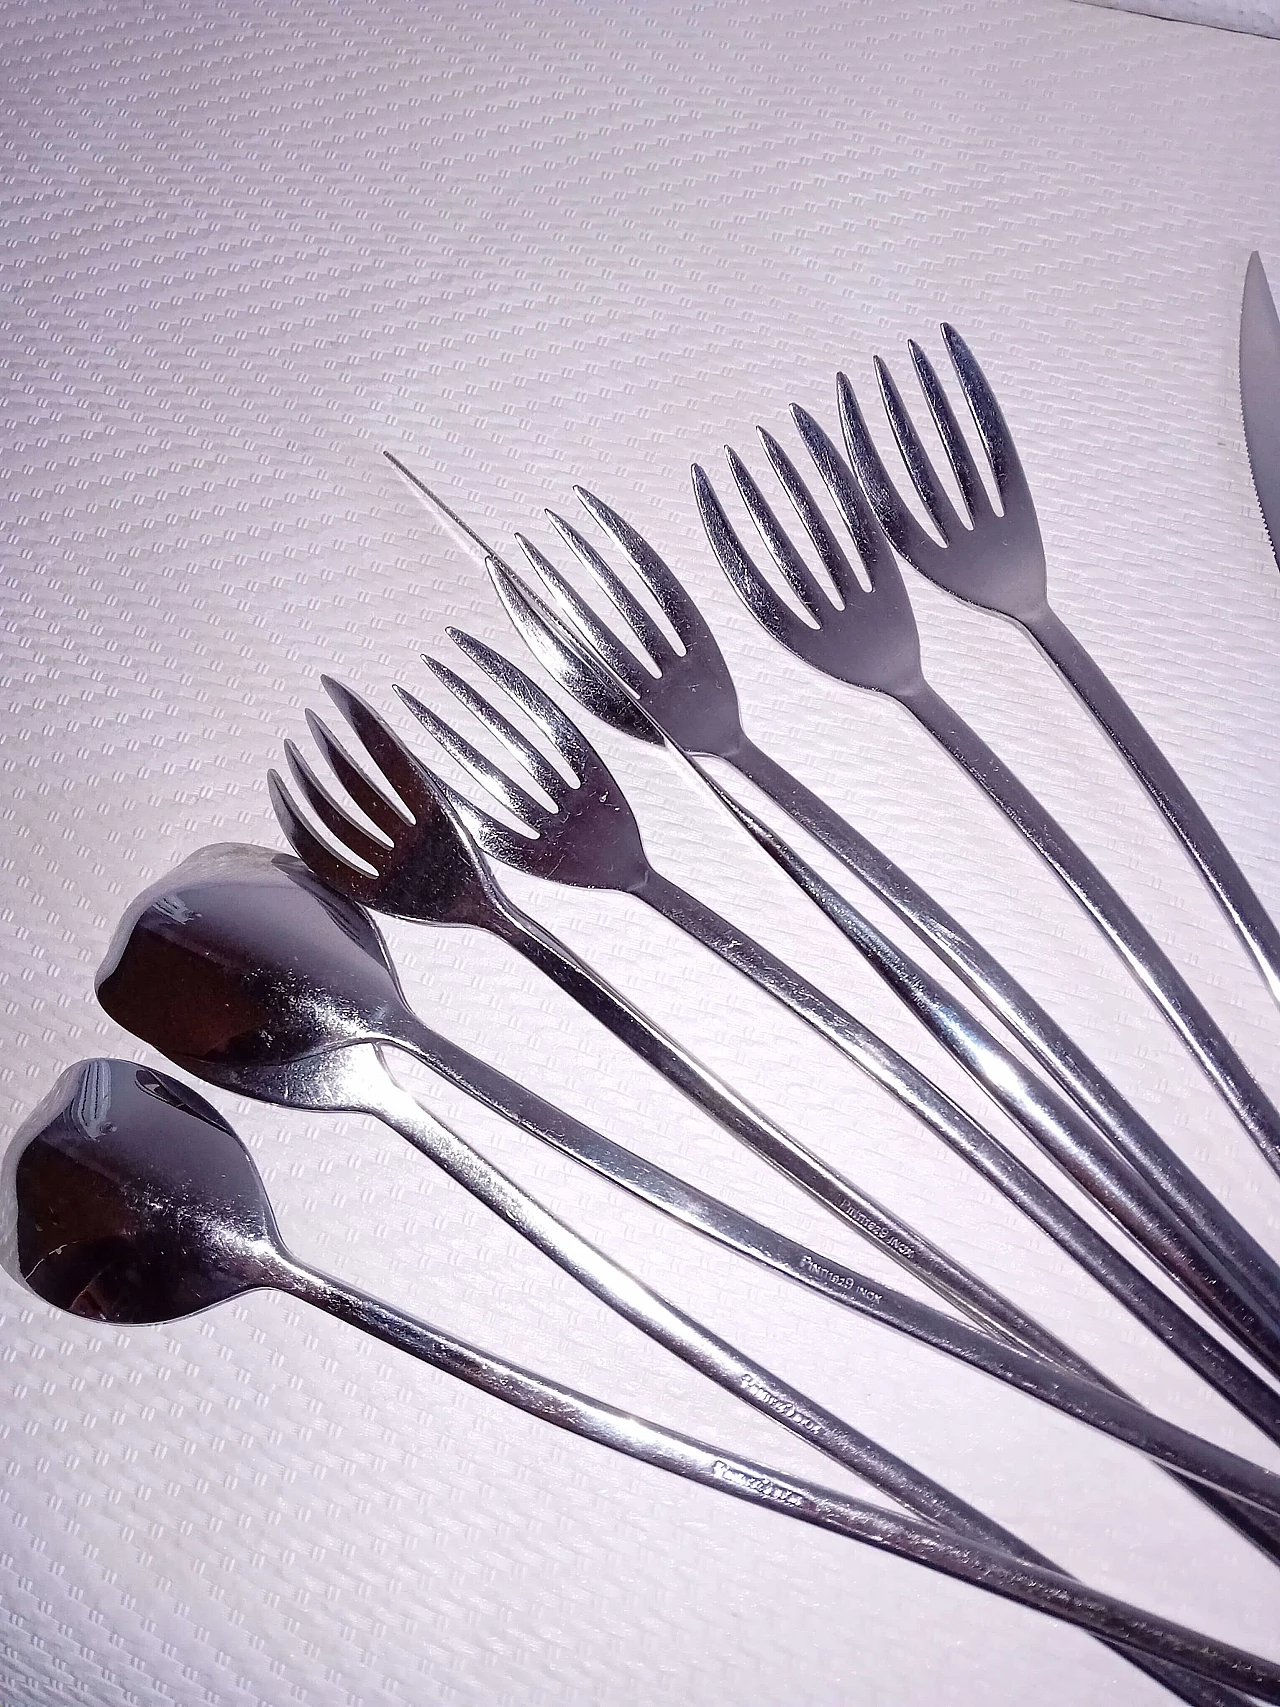 Stainless steel cutlery service by Pinti 1929 19